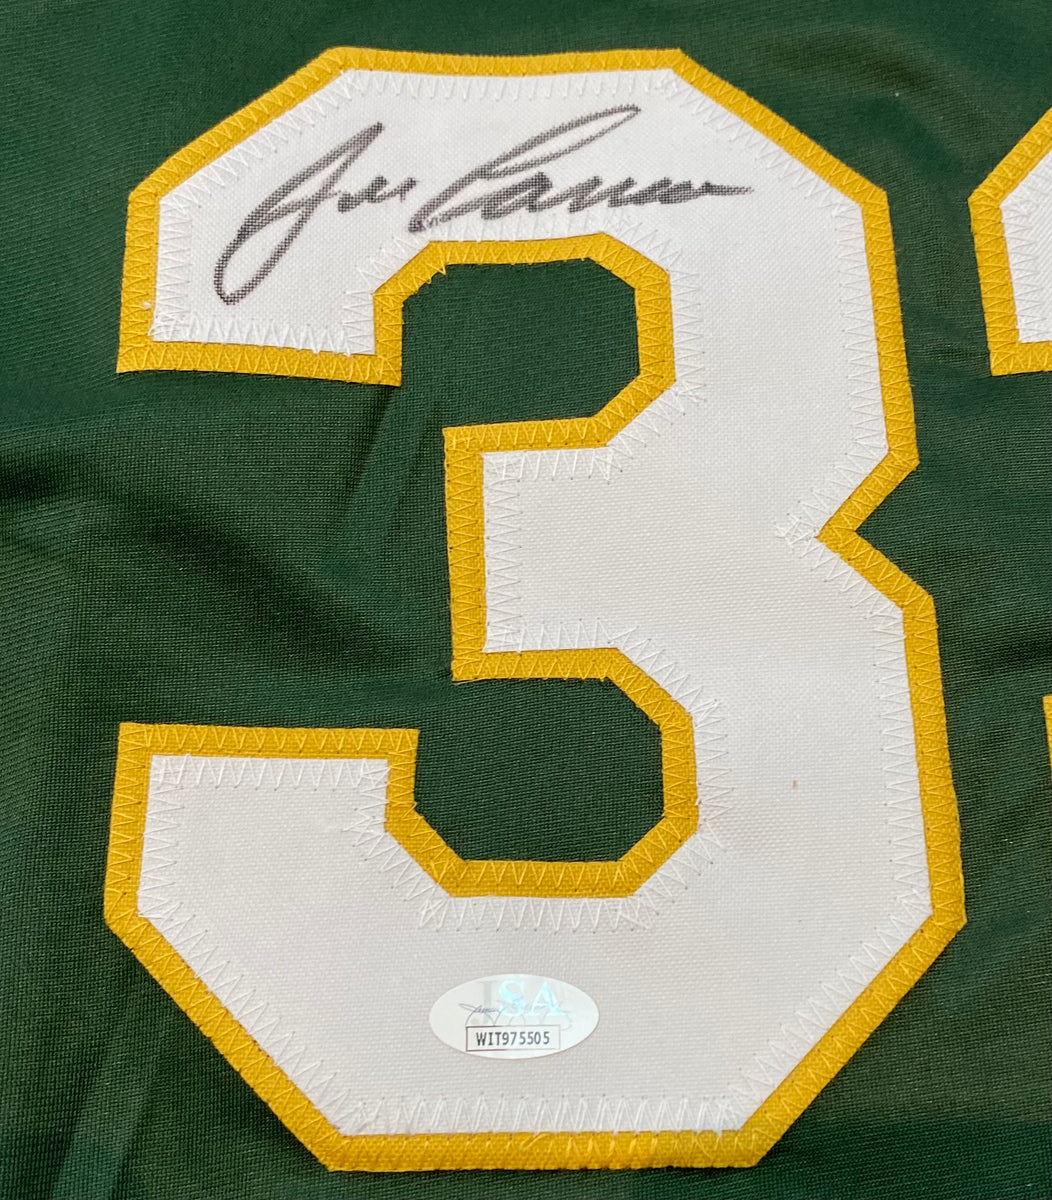 Jose Canseco Signed Jersey (JSA COA)